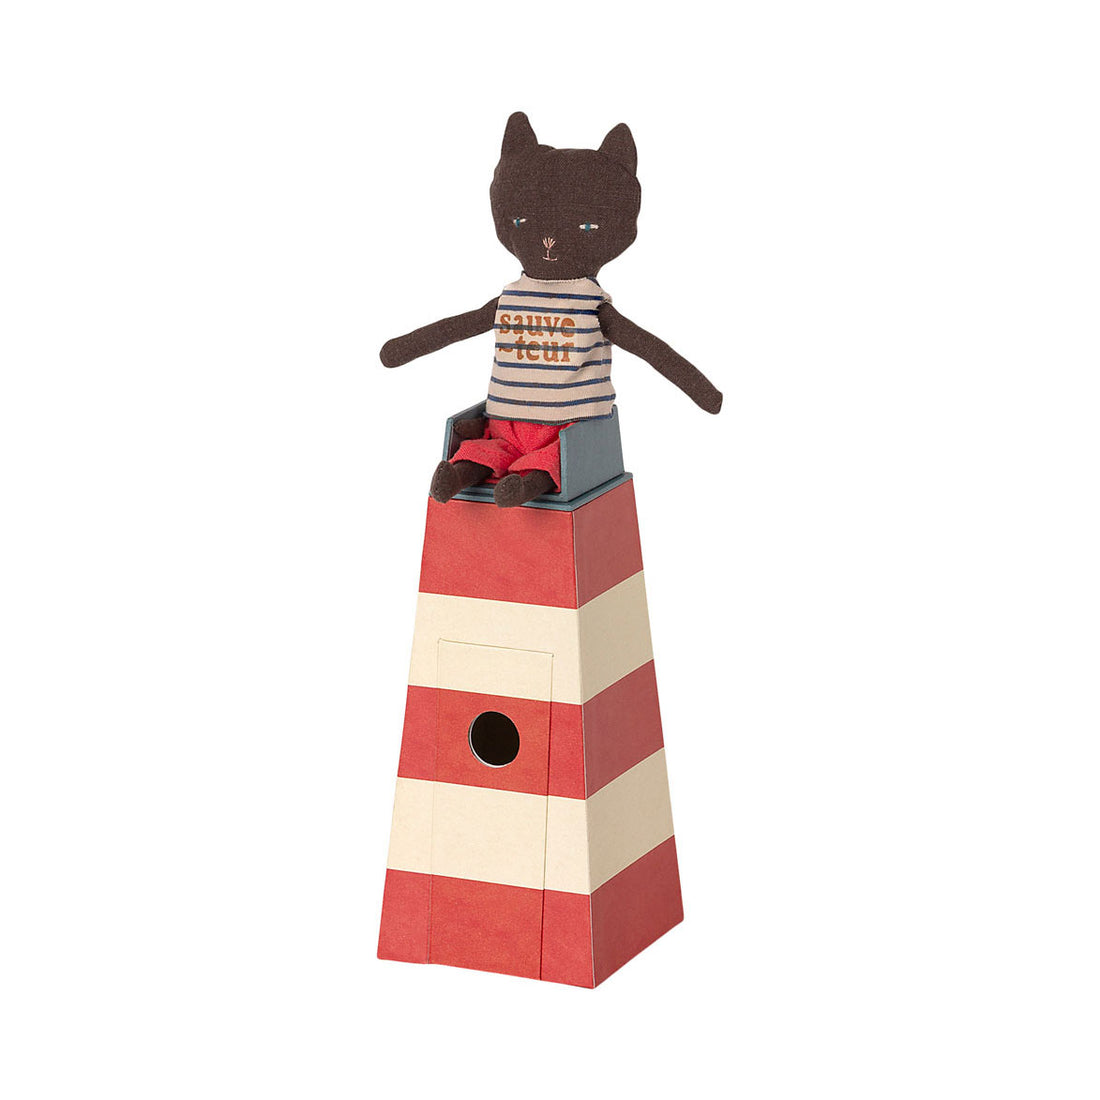 Maileg Sauveteur, Tower with cat